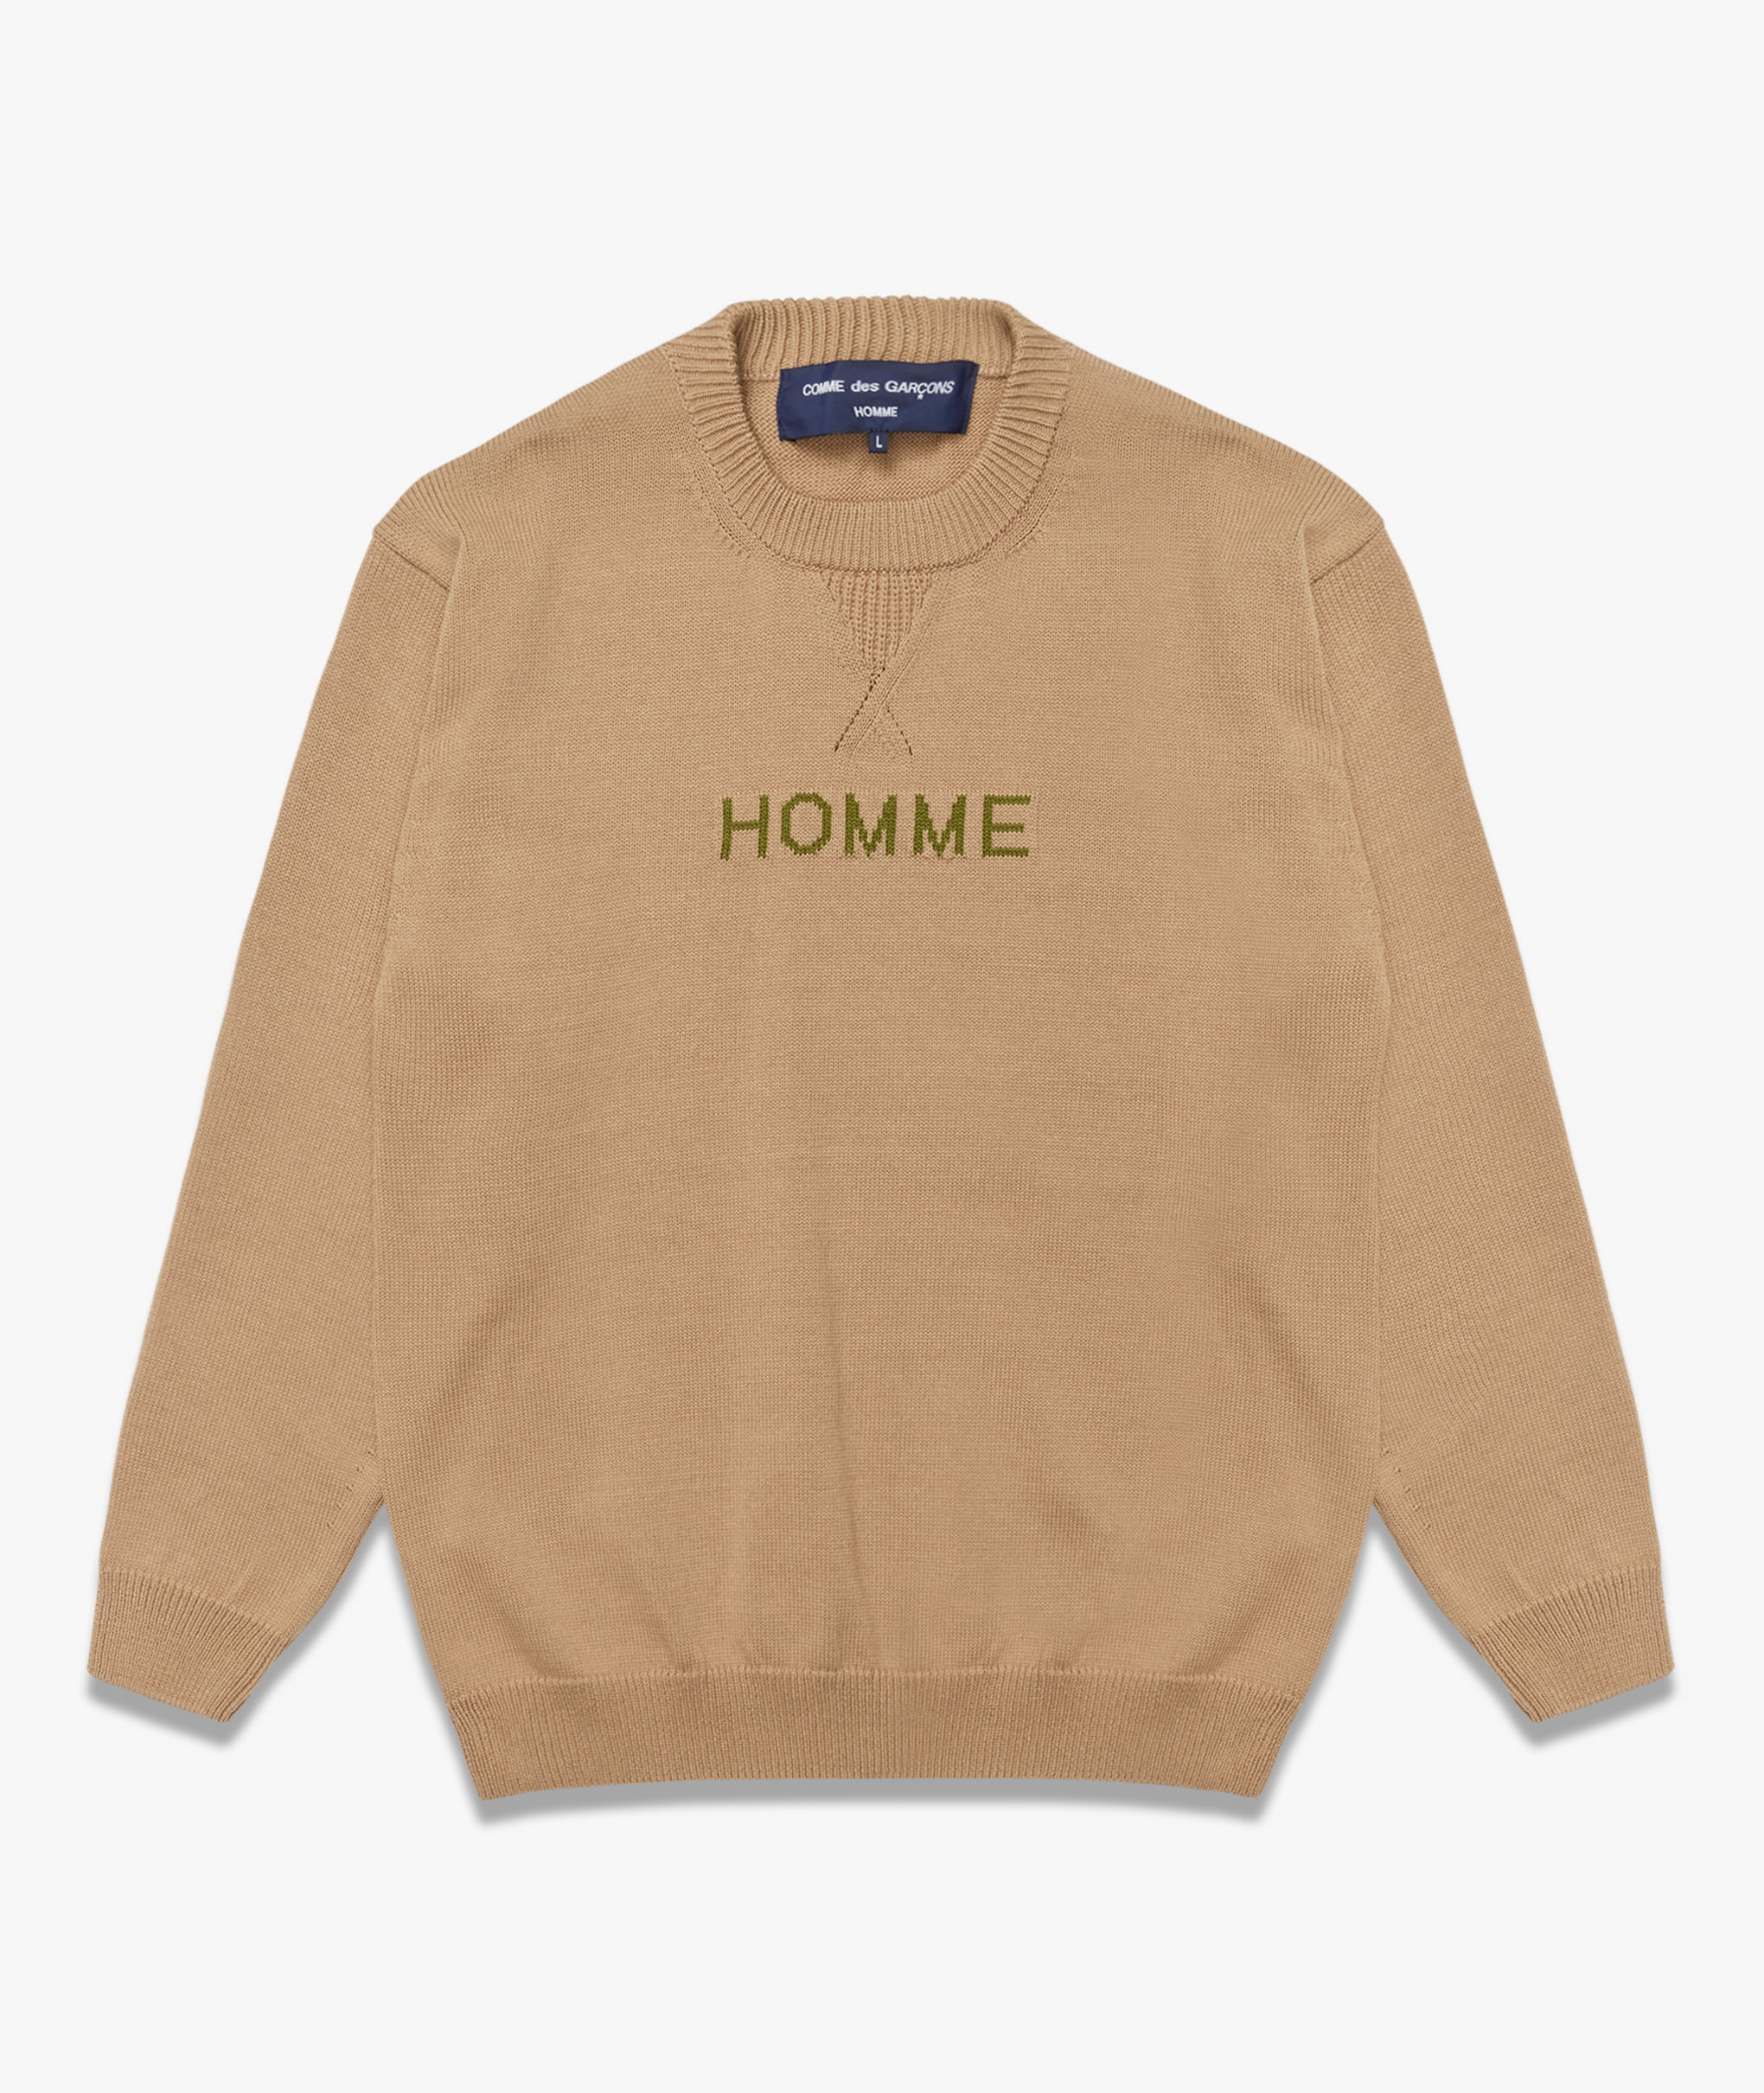 Norse Store | Shipping Worldwide - Comme Des Garcons Homme Knitted 